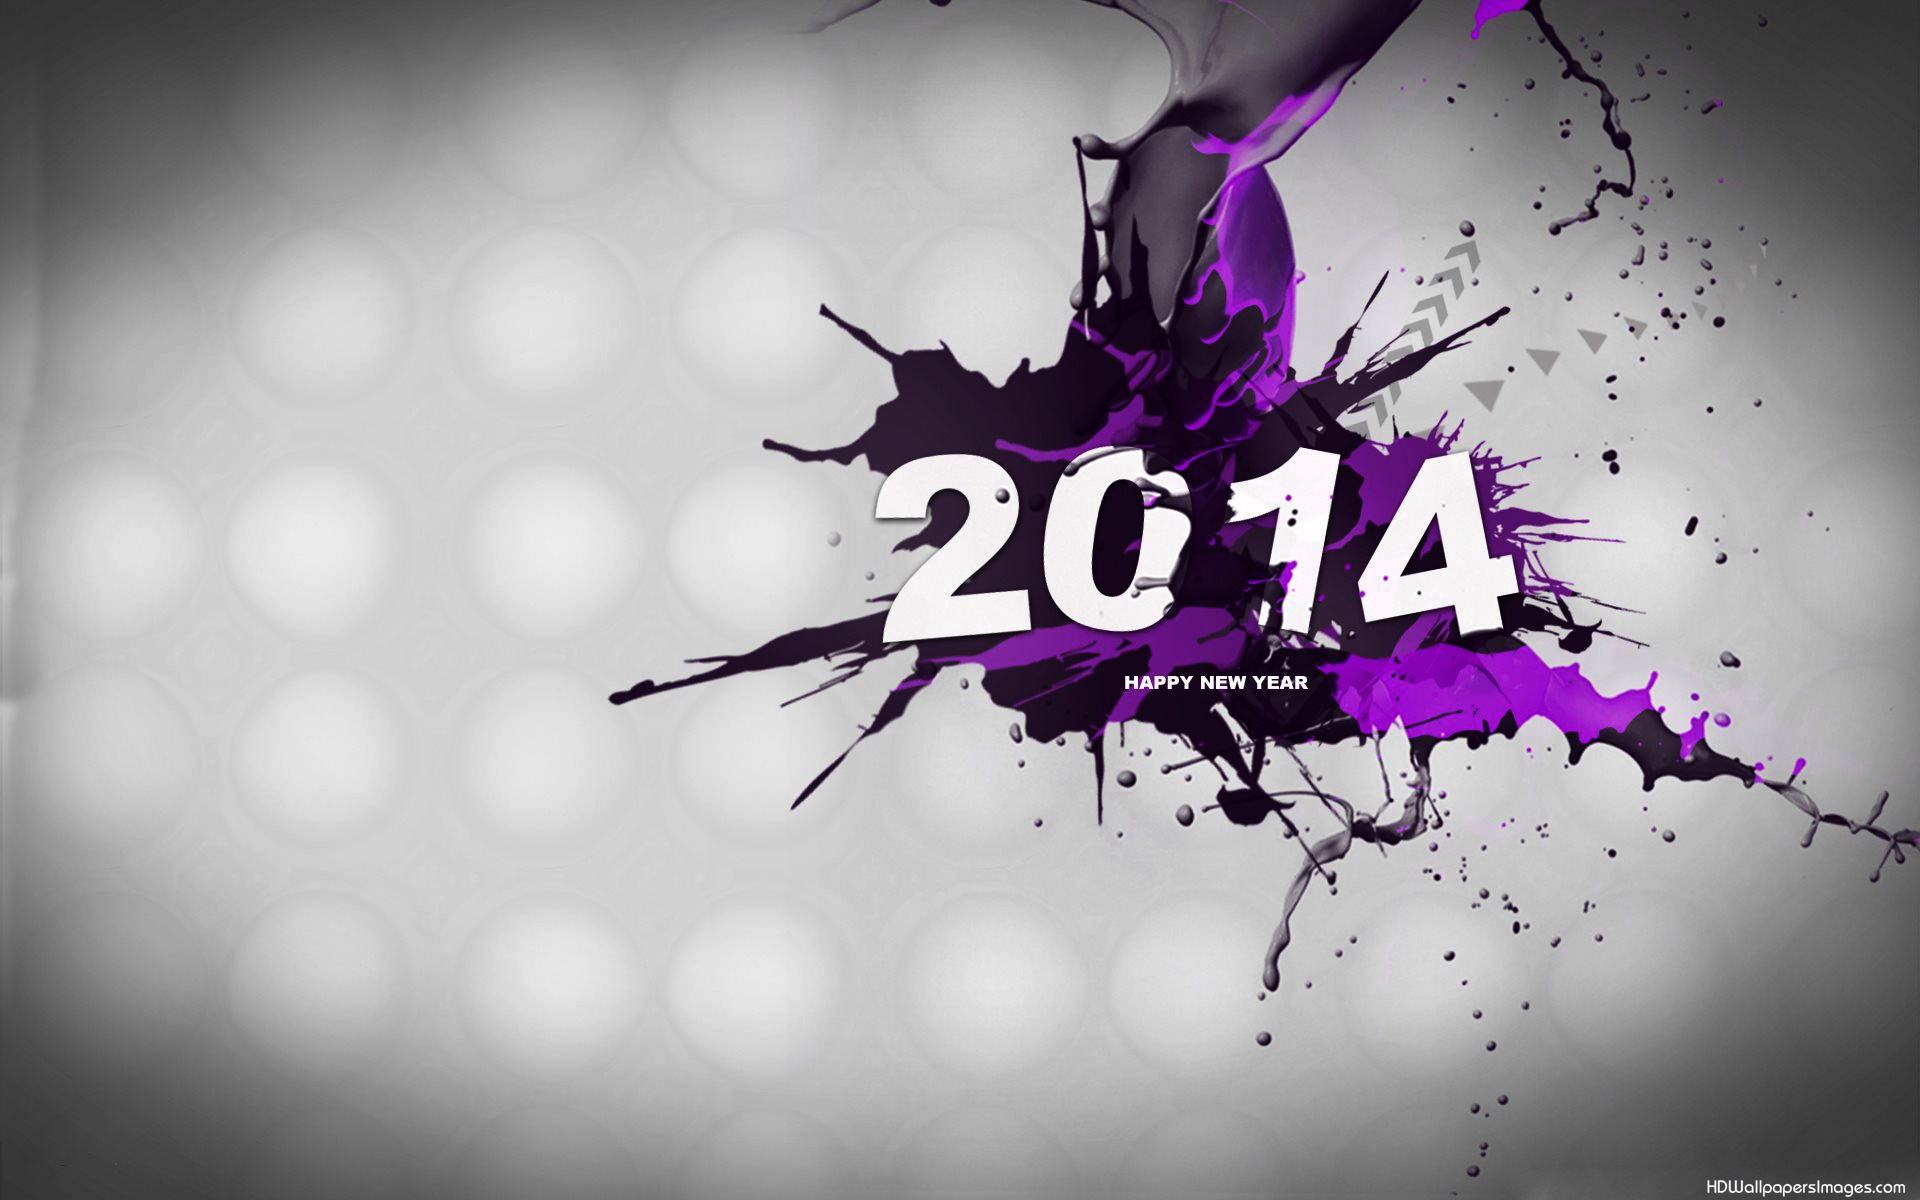 Welcome 2014 HD Wallpaper Picture Widescreen For PC Desktop